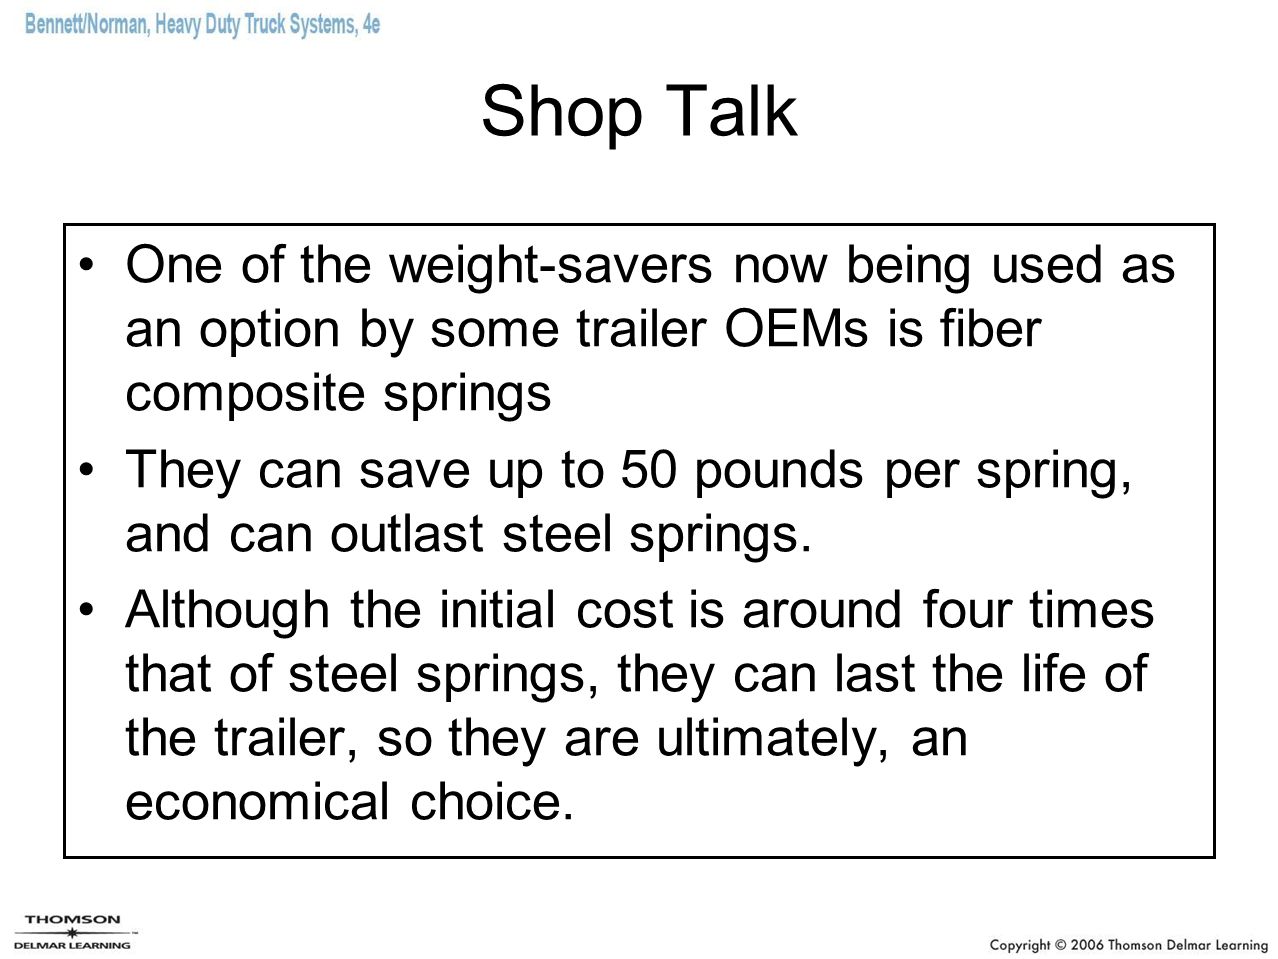 Shop Talk One of the weight-savers now being used as an option by some trailer OEMs is fiber composite springs They can save up to 50 pounds per spring, and can outlast steel springs.